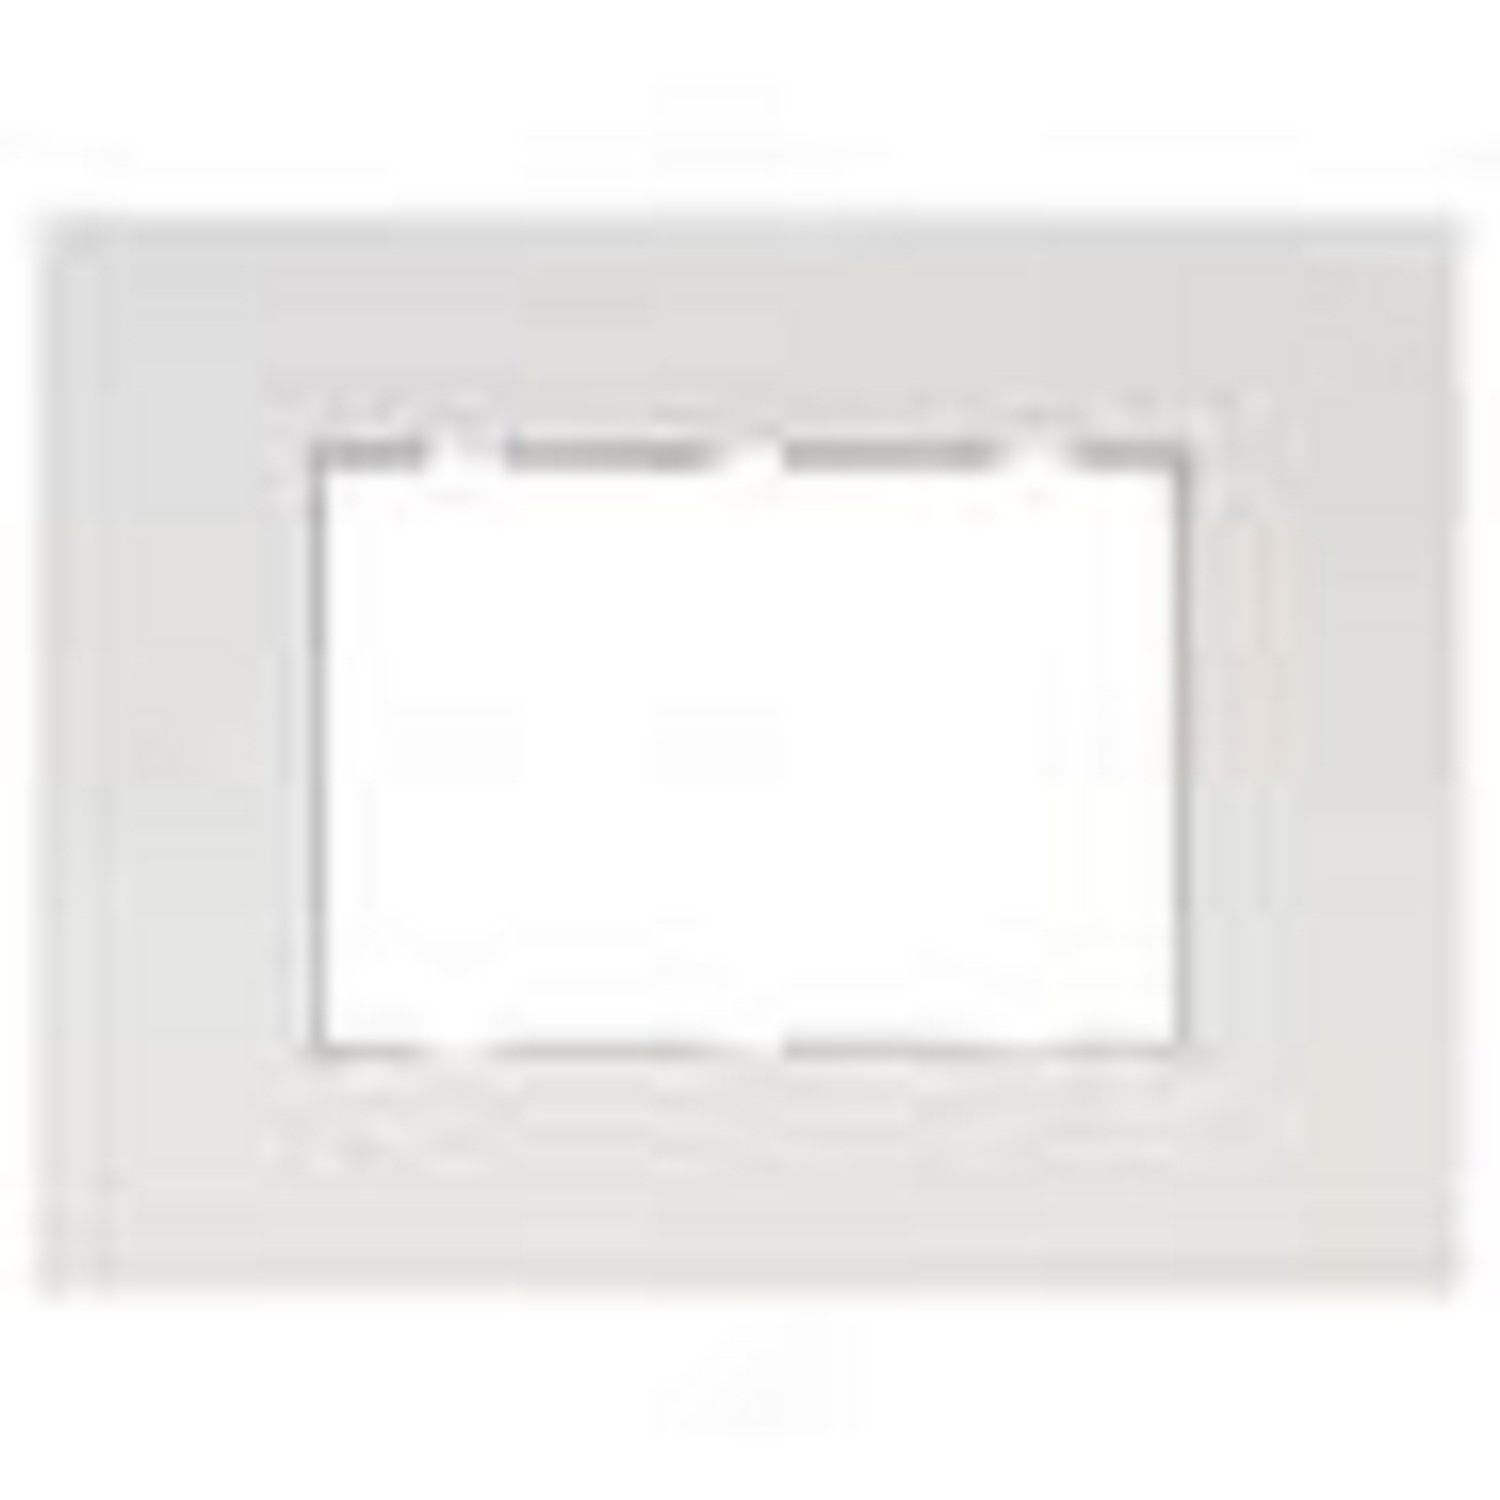 GreatWhite Fiana 3 Module Cover Plate with Base Frame - White